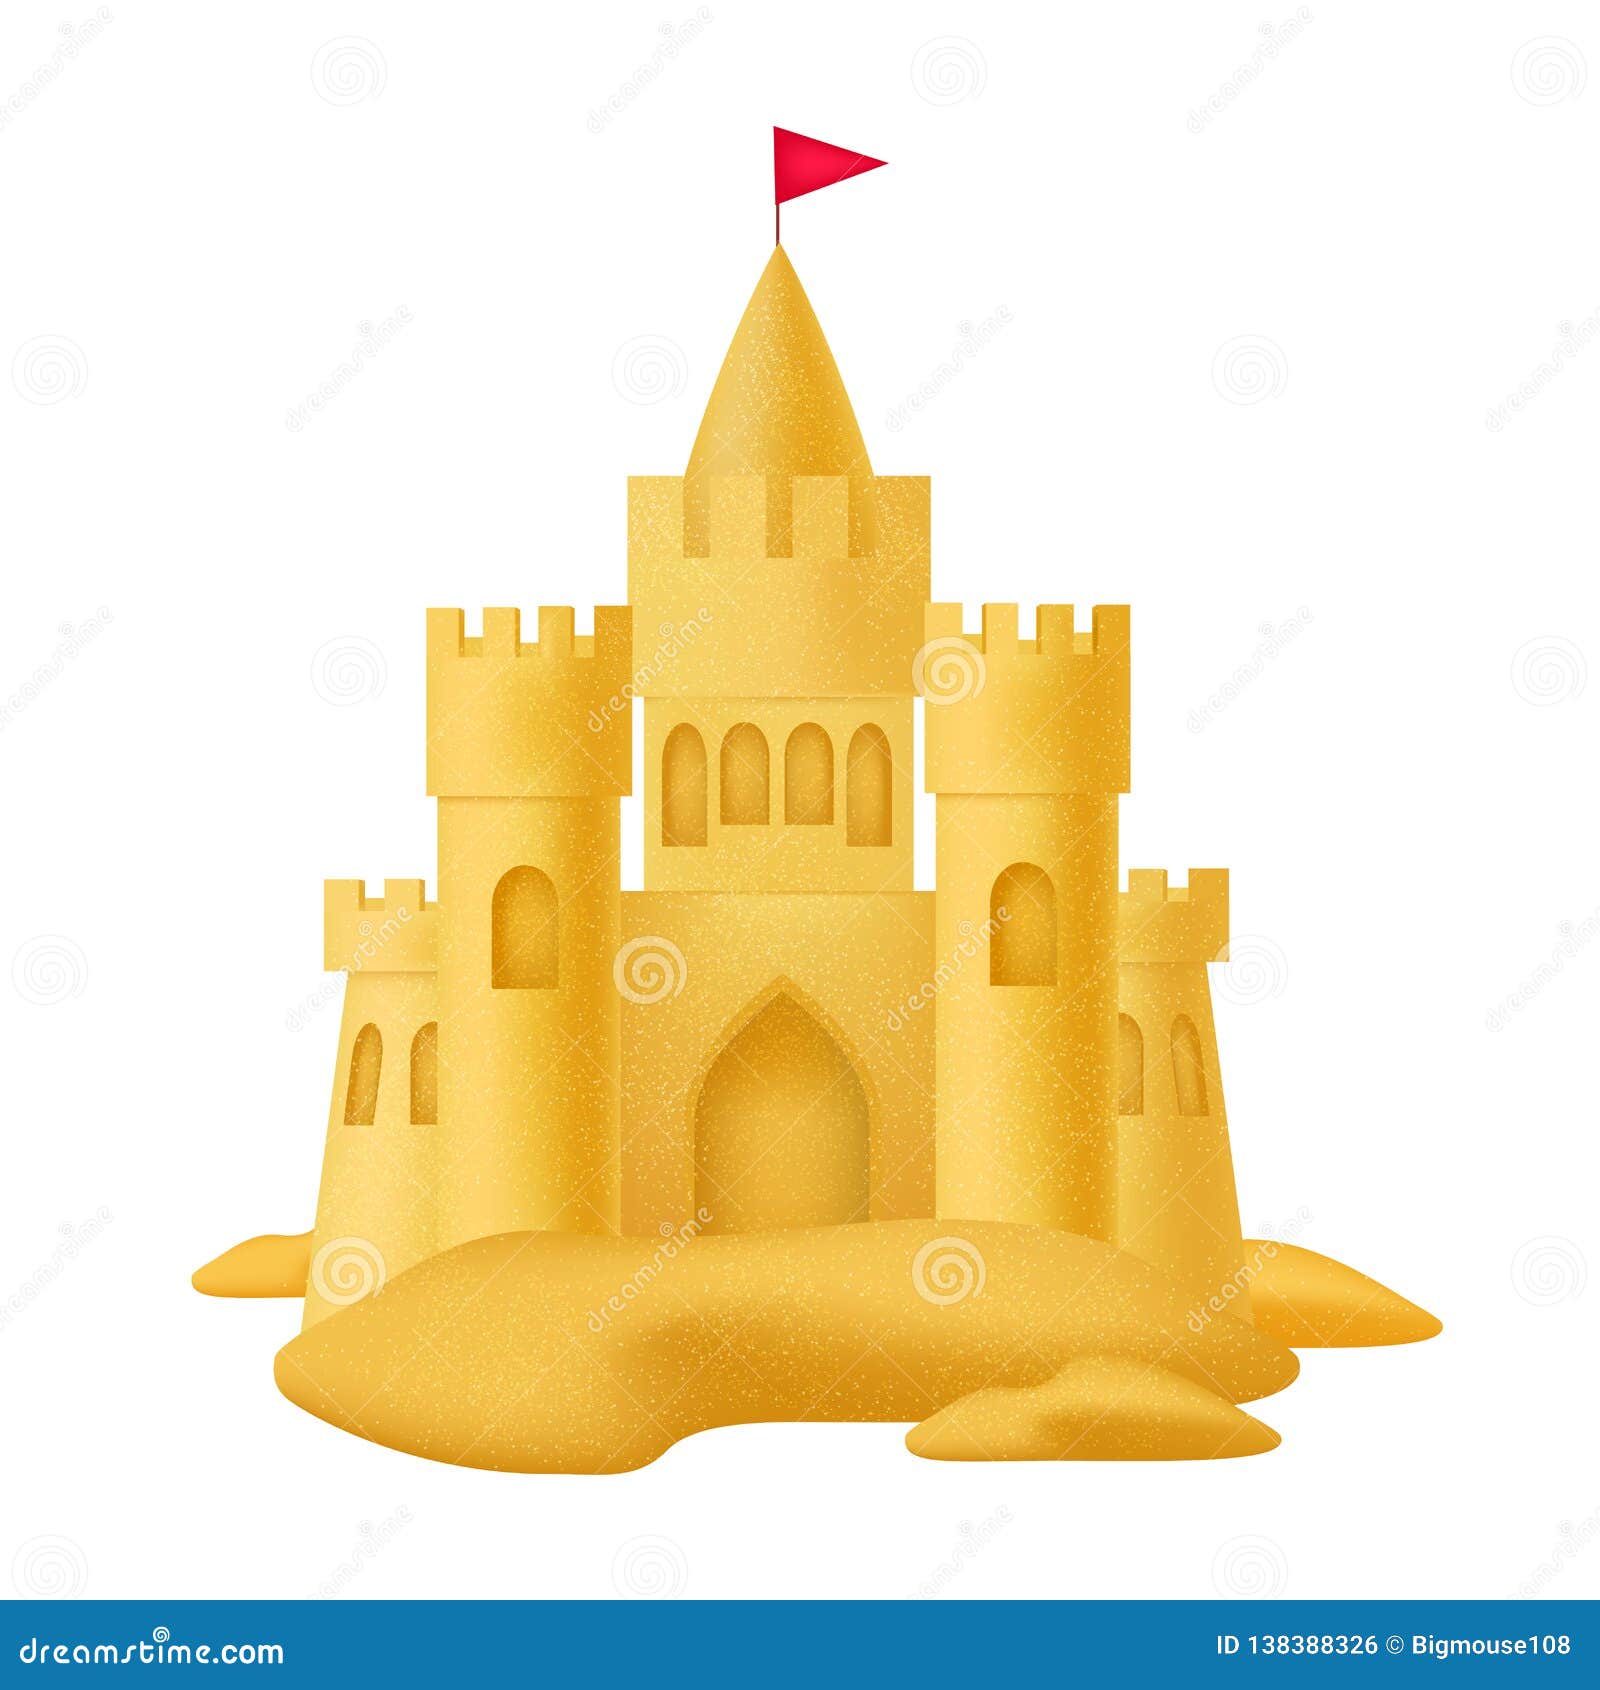 Sandcastle drawing | Sandcastle on the beach drawings | Sand castles